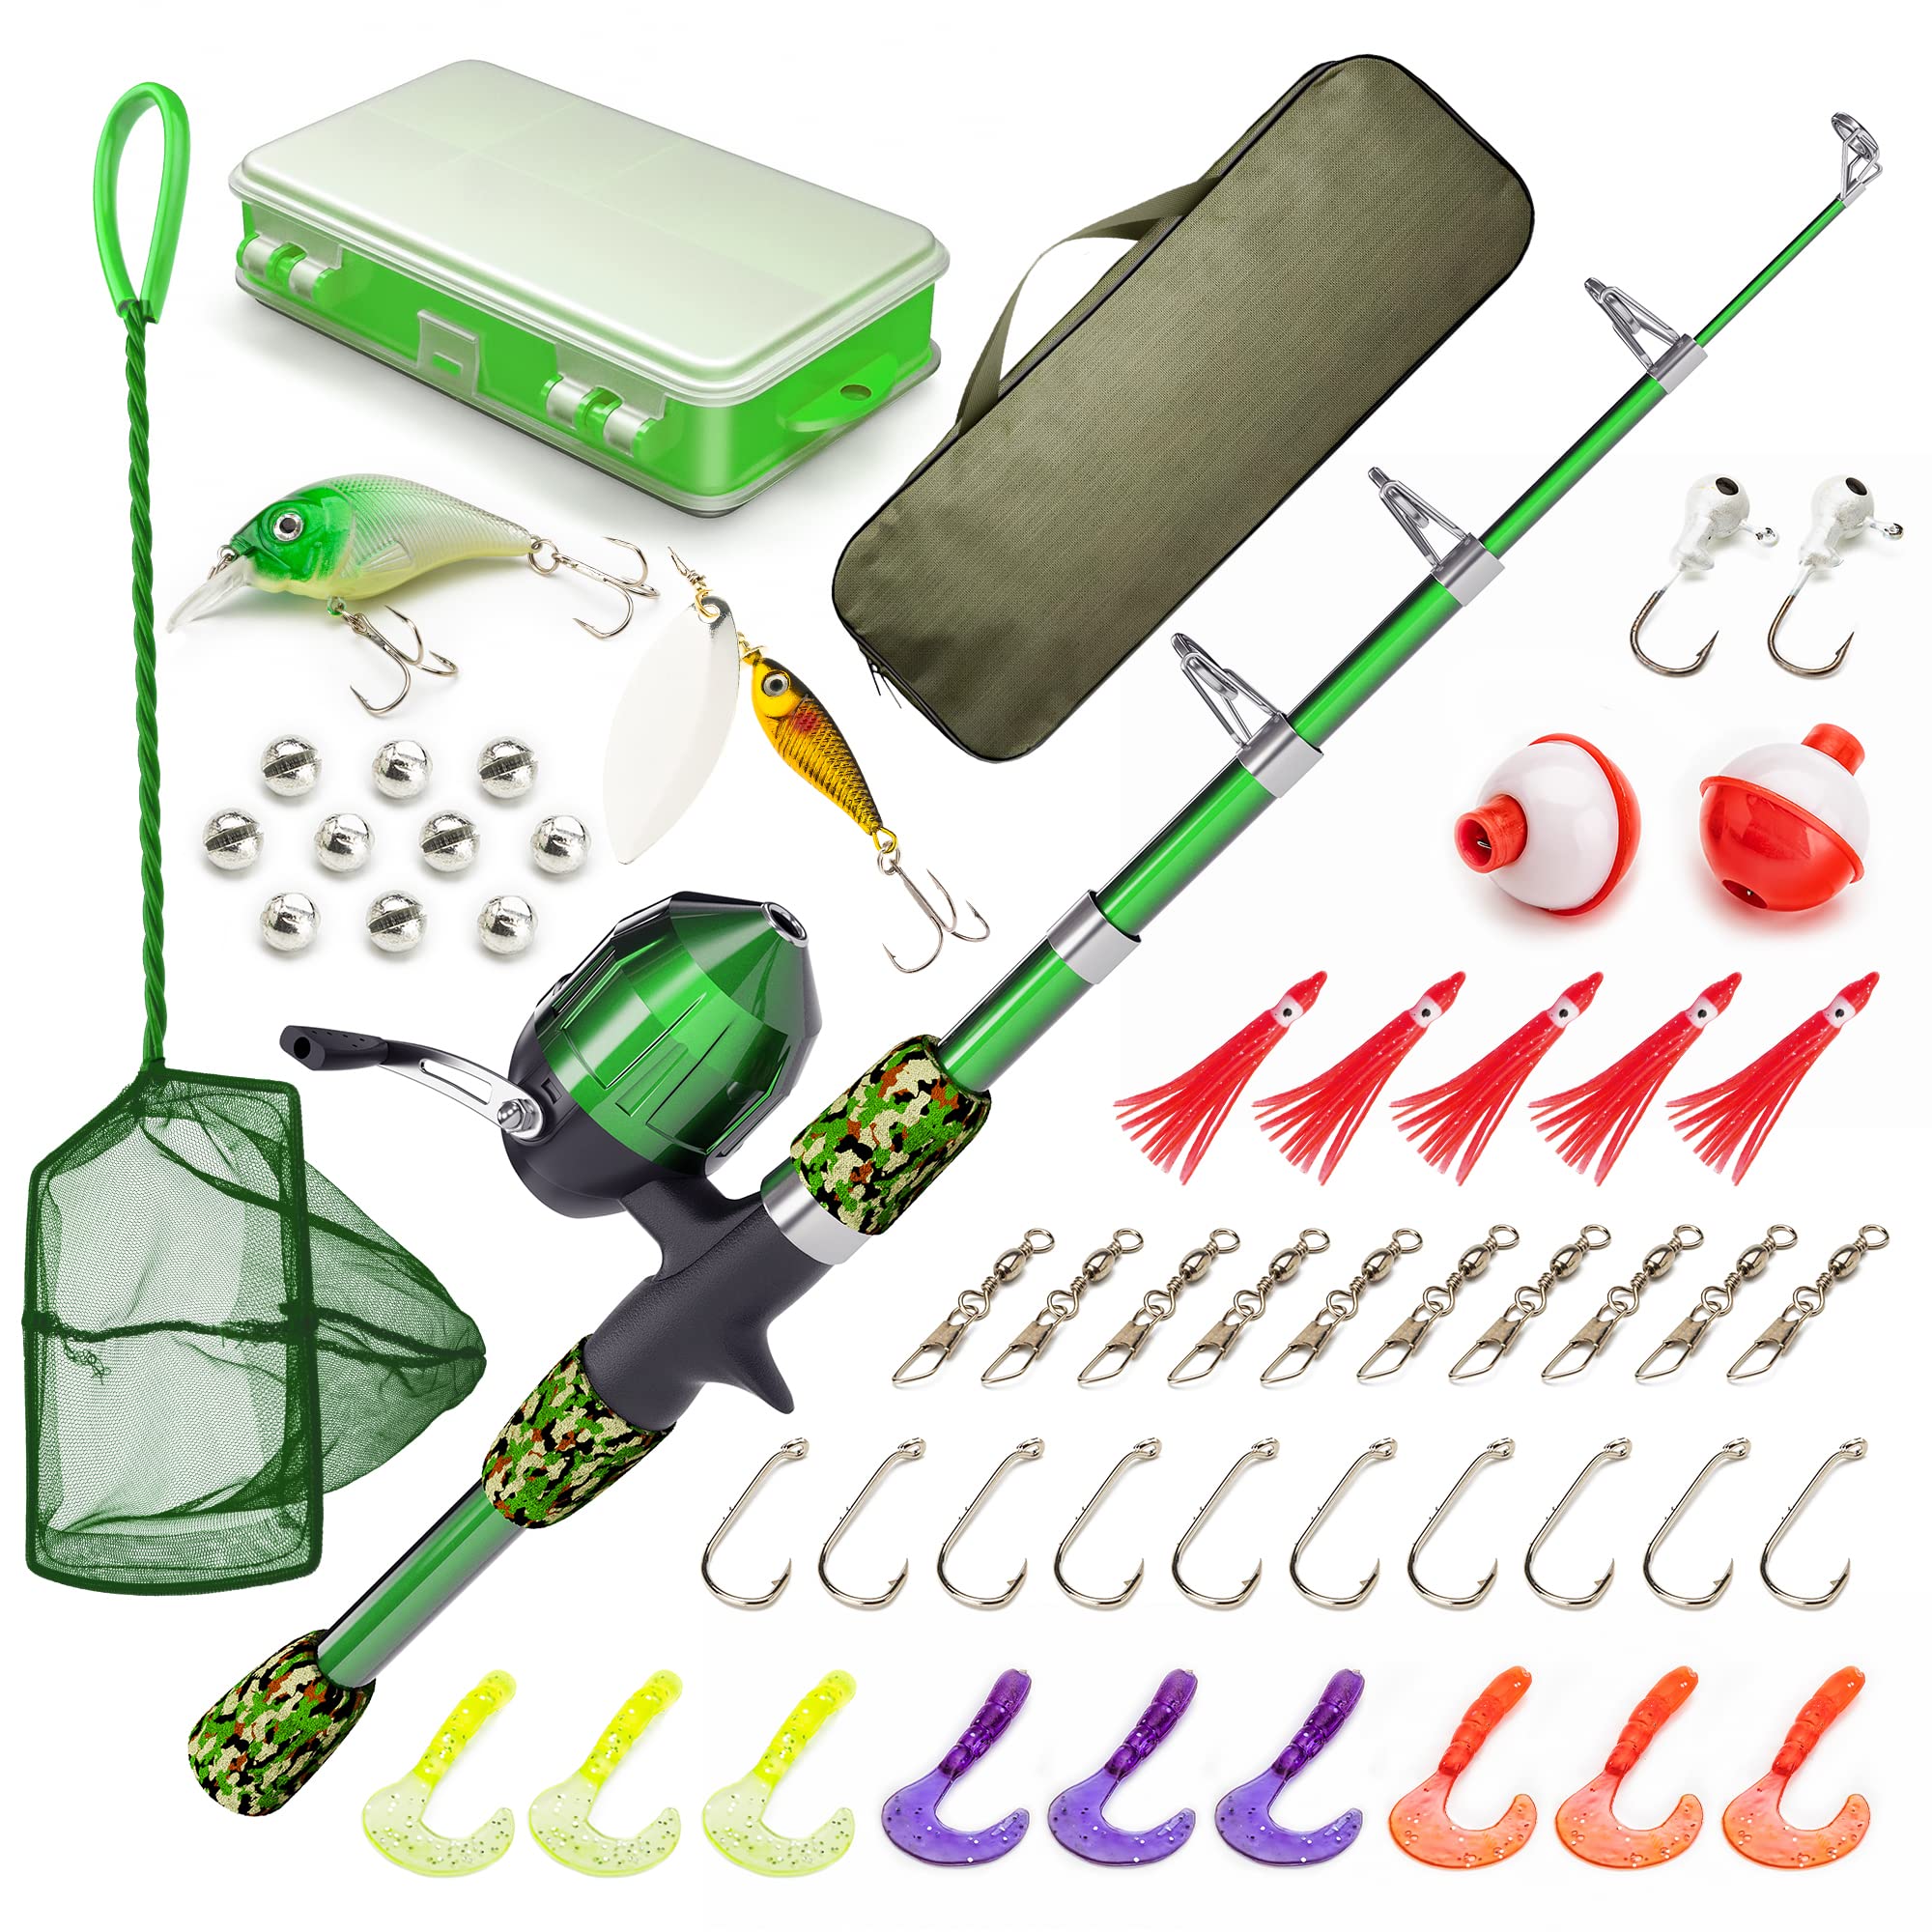 Fishing Pole and Tackle Box Kit with Fishing Rod, Line, Hook, Reel, Bait,  Bait Box and Canvas Bag for Girls, Boys and Youth